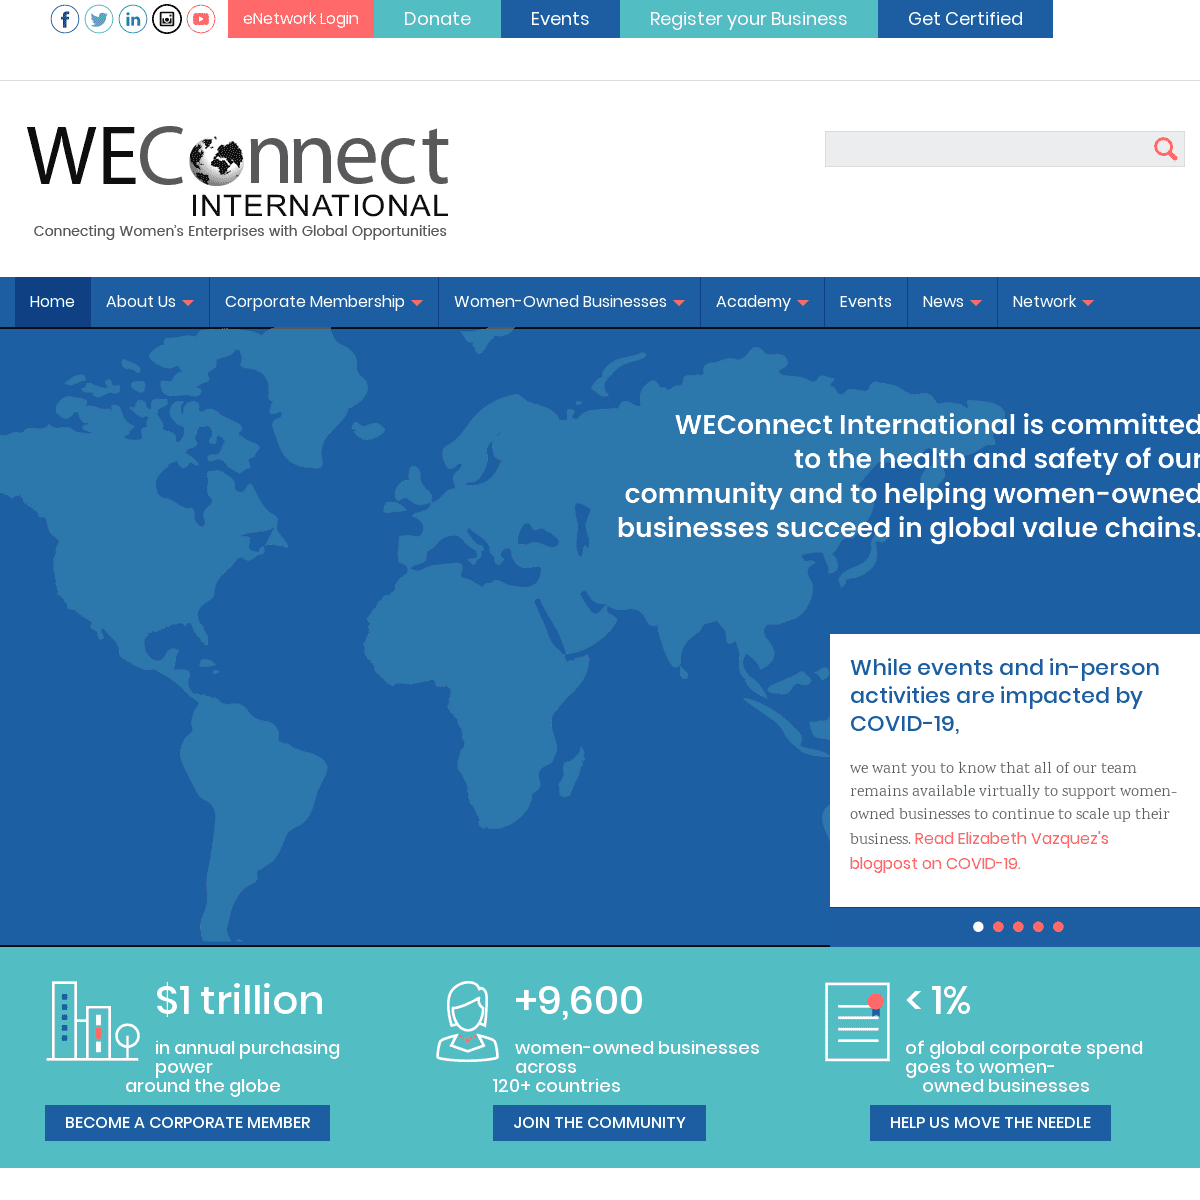 A complete backup of weconnectinternational.org